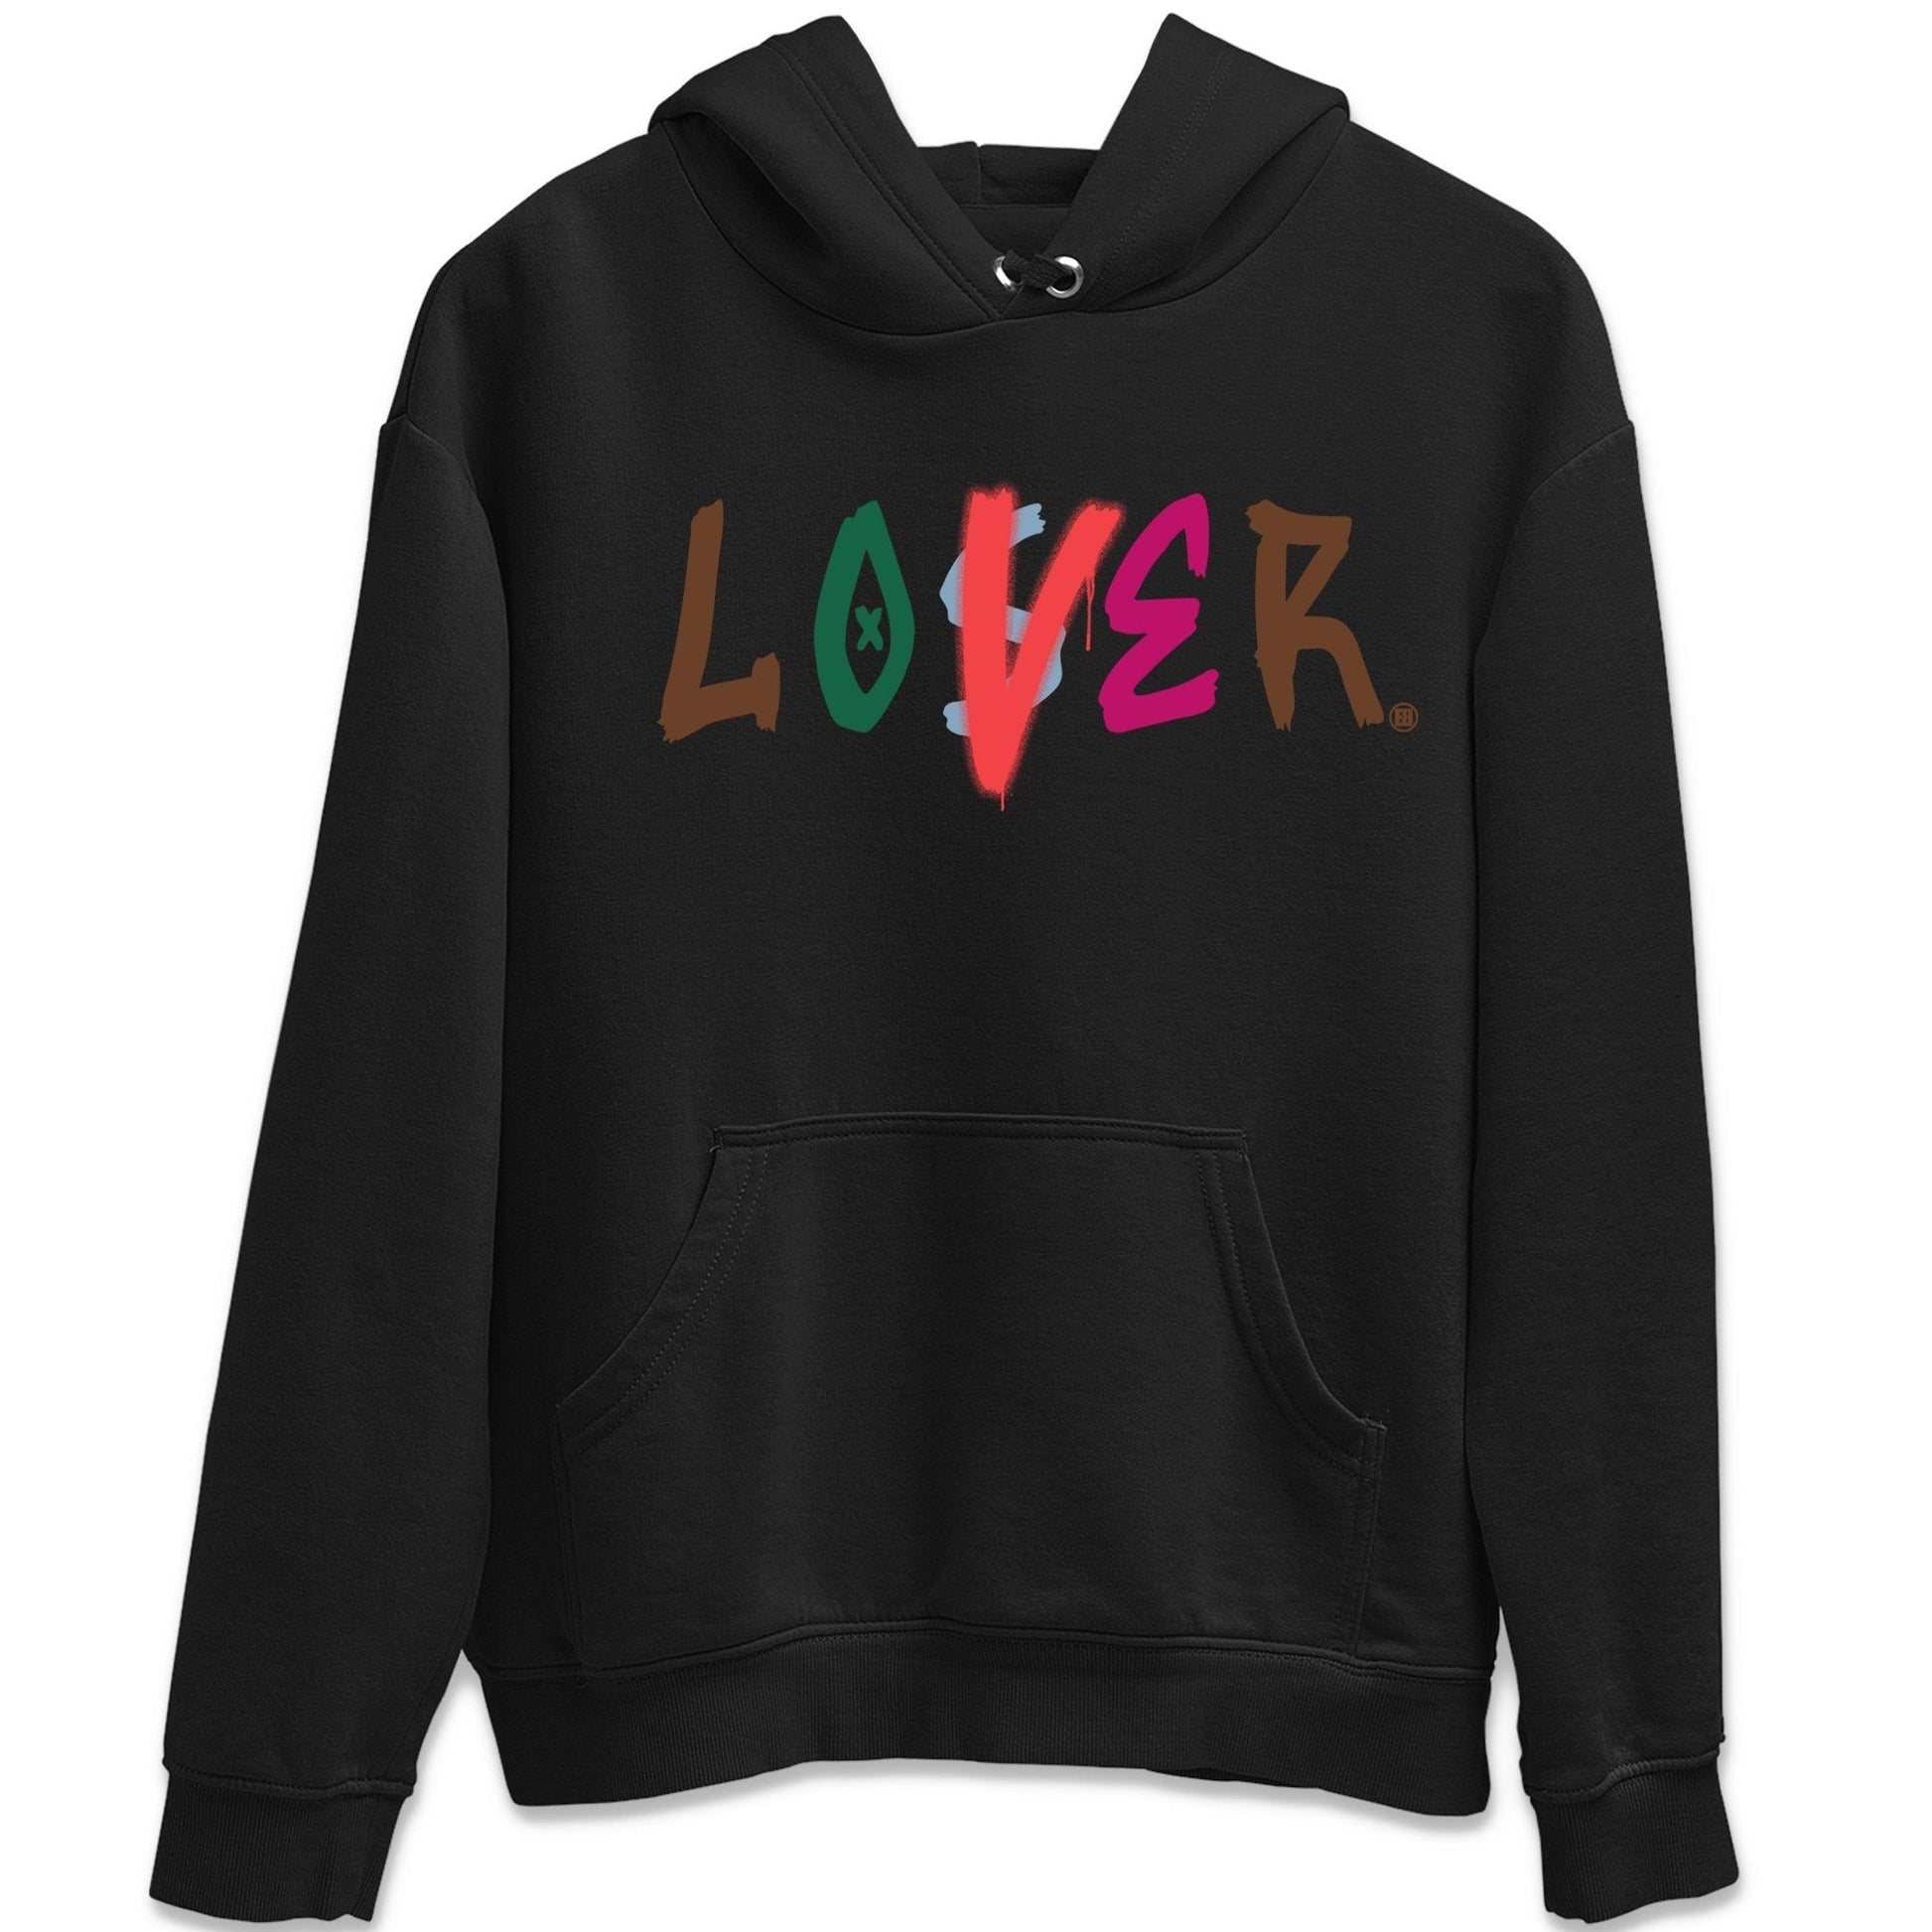 Jordan 1 Hand Crafted Sneaker Match Tees Loser Lover Sneaker Tees Jordan 1 Hand Crafted Sneaker Release Tees Unisex Shirts